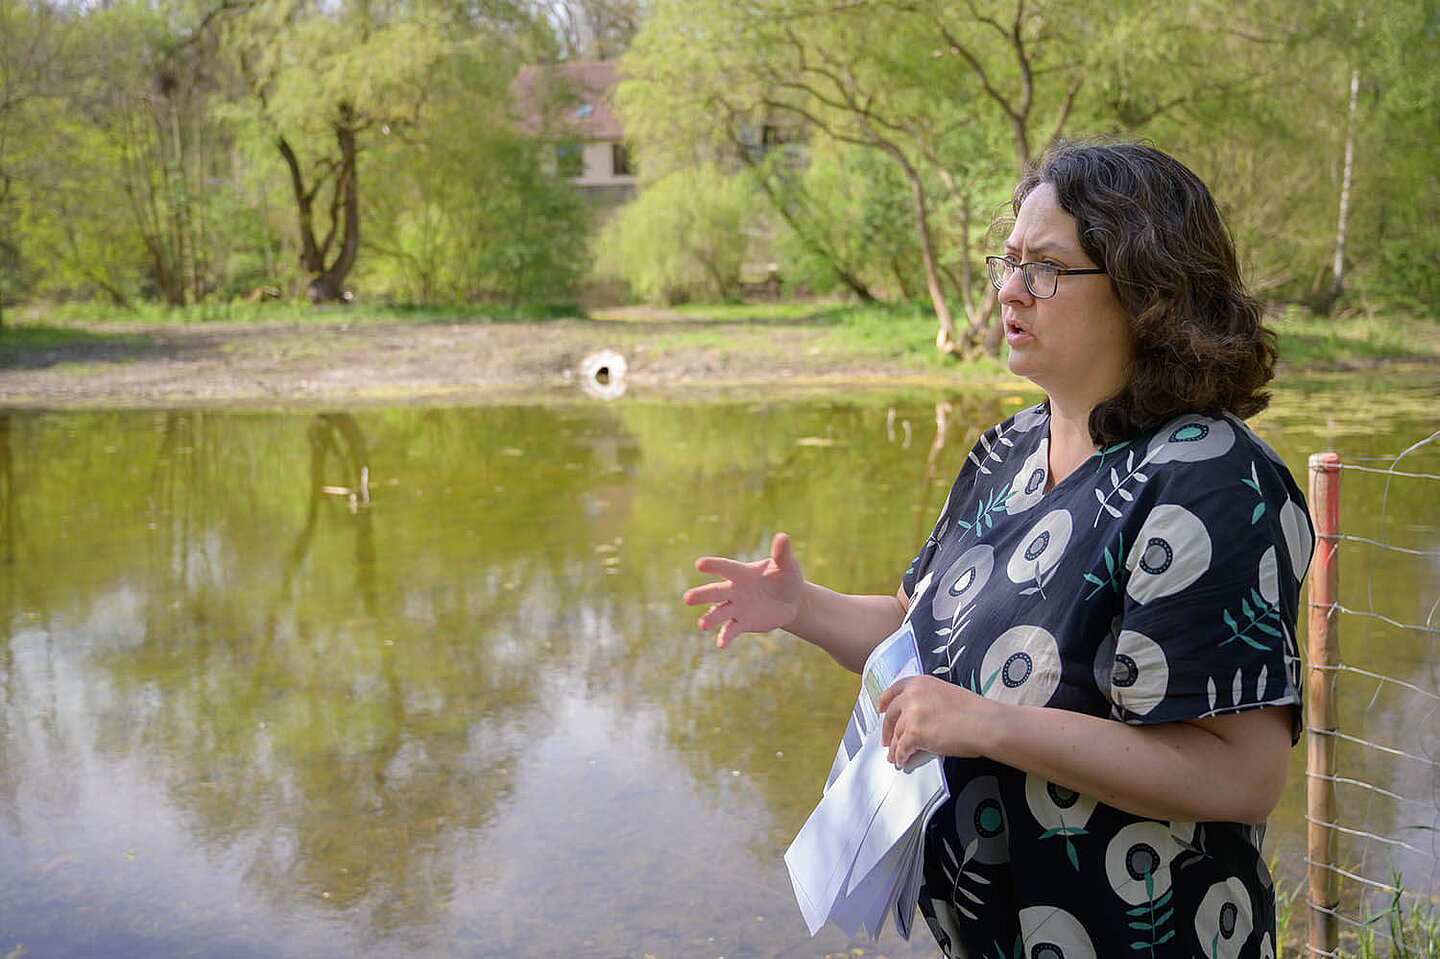 A woman standing in front of a pond explains something to a person who is not visible while gesturing